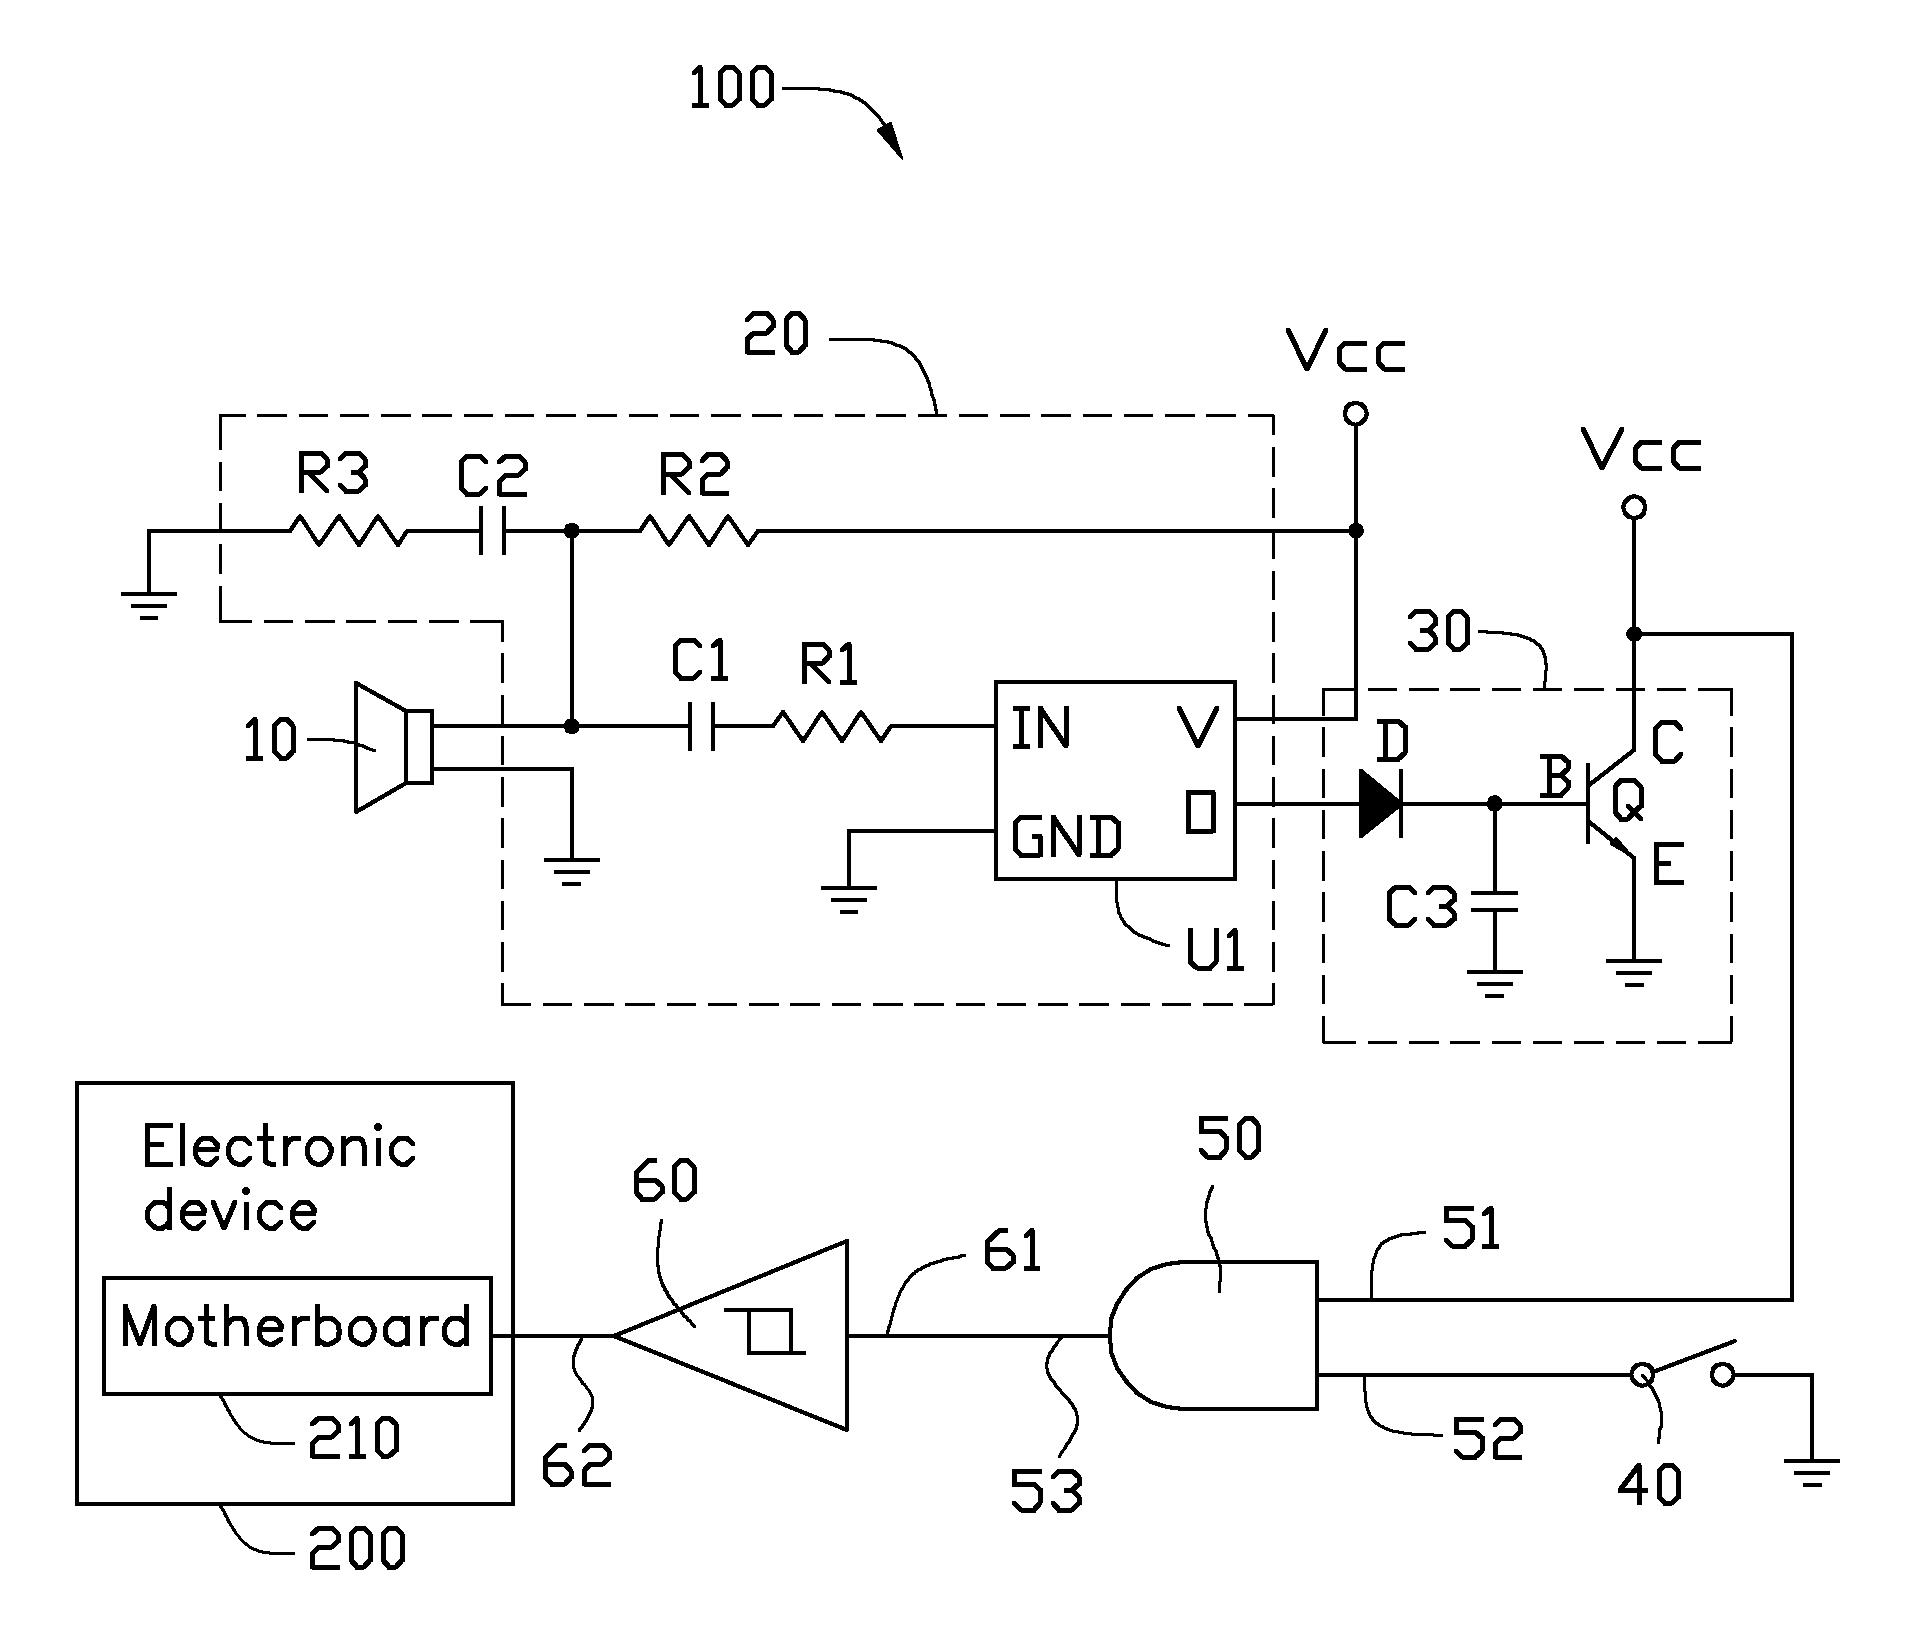 Voice control circuit for starting electronic devices